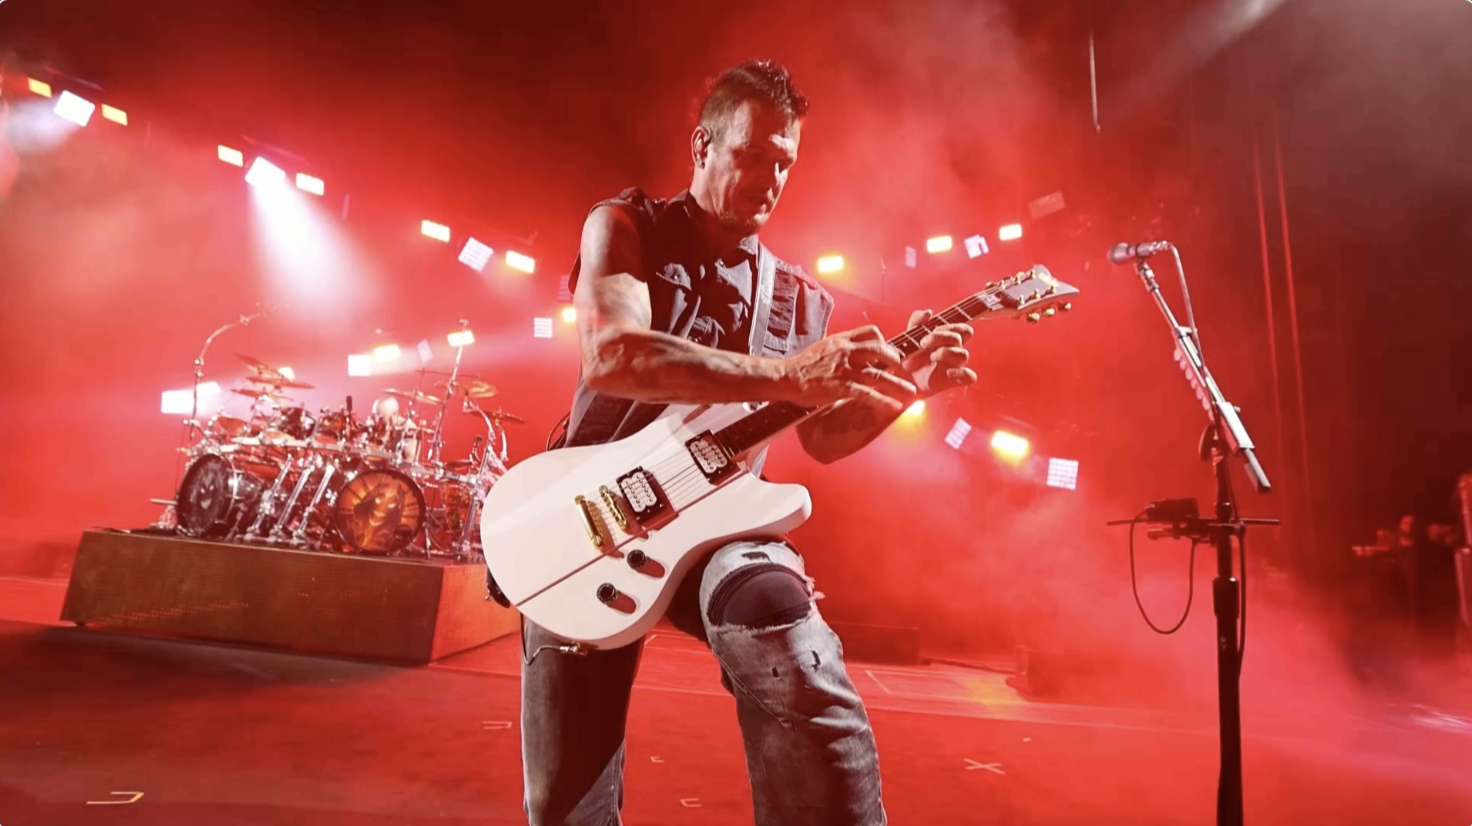 Thumbnail of guitarist Dan Donegan from Disturbed's "Perfect Insanity" live video